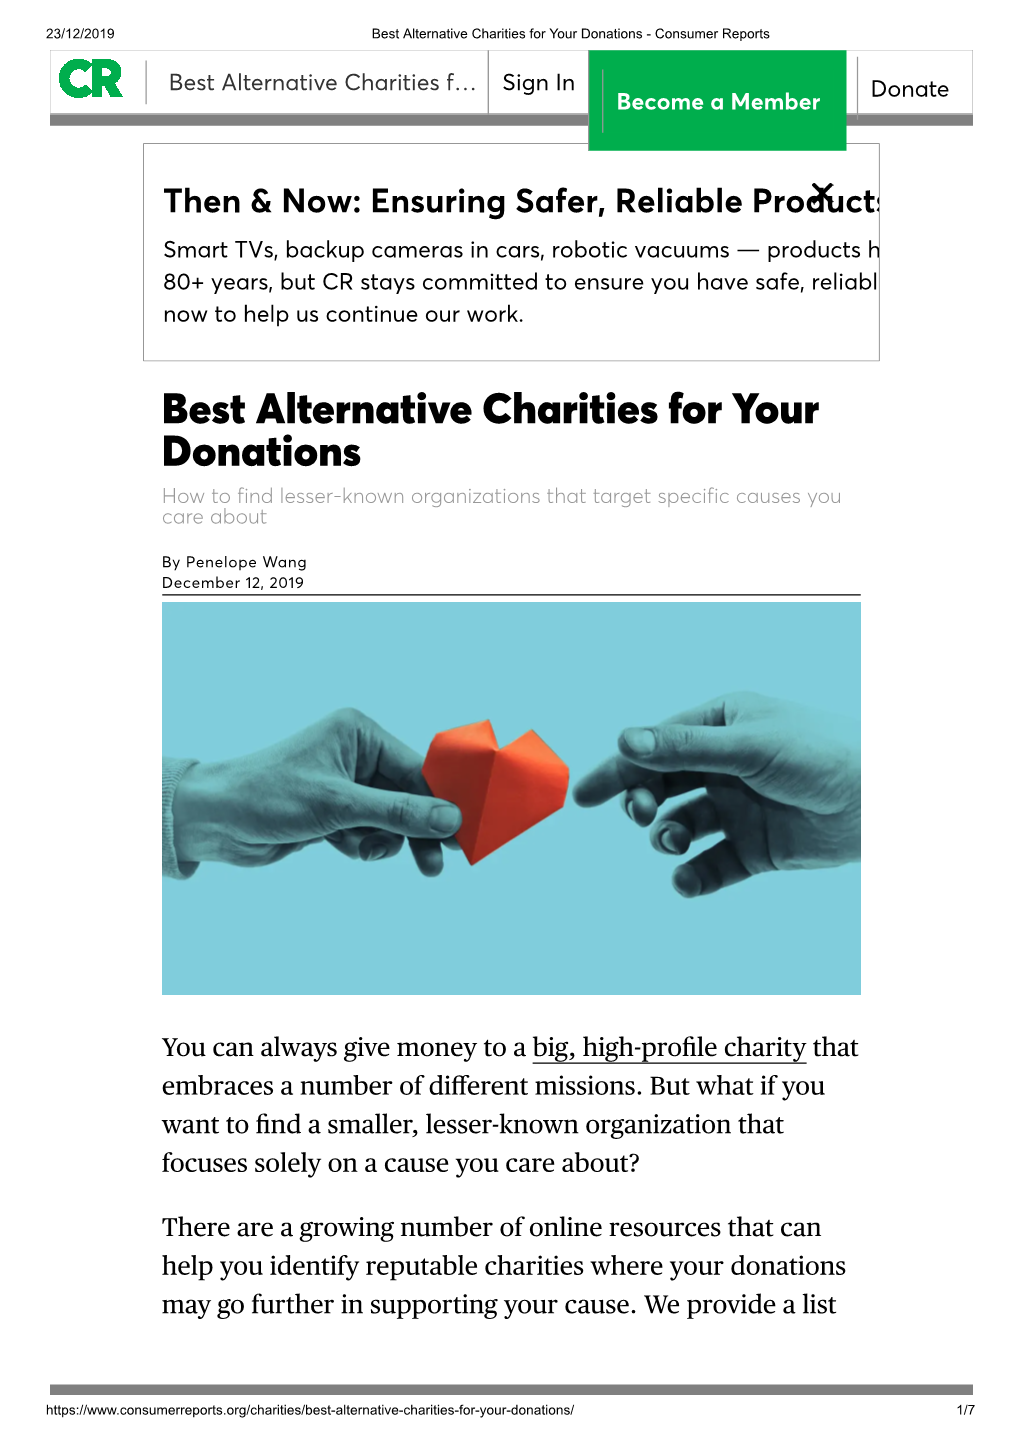 Best Alternative Charities for Your Donations - Consumer Reports